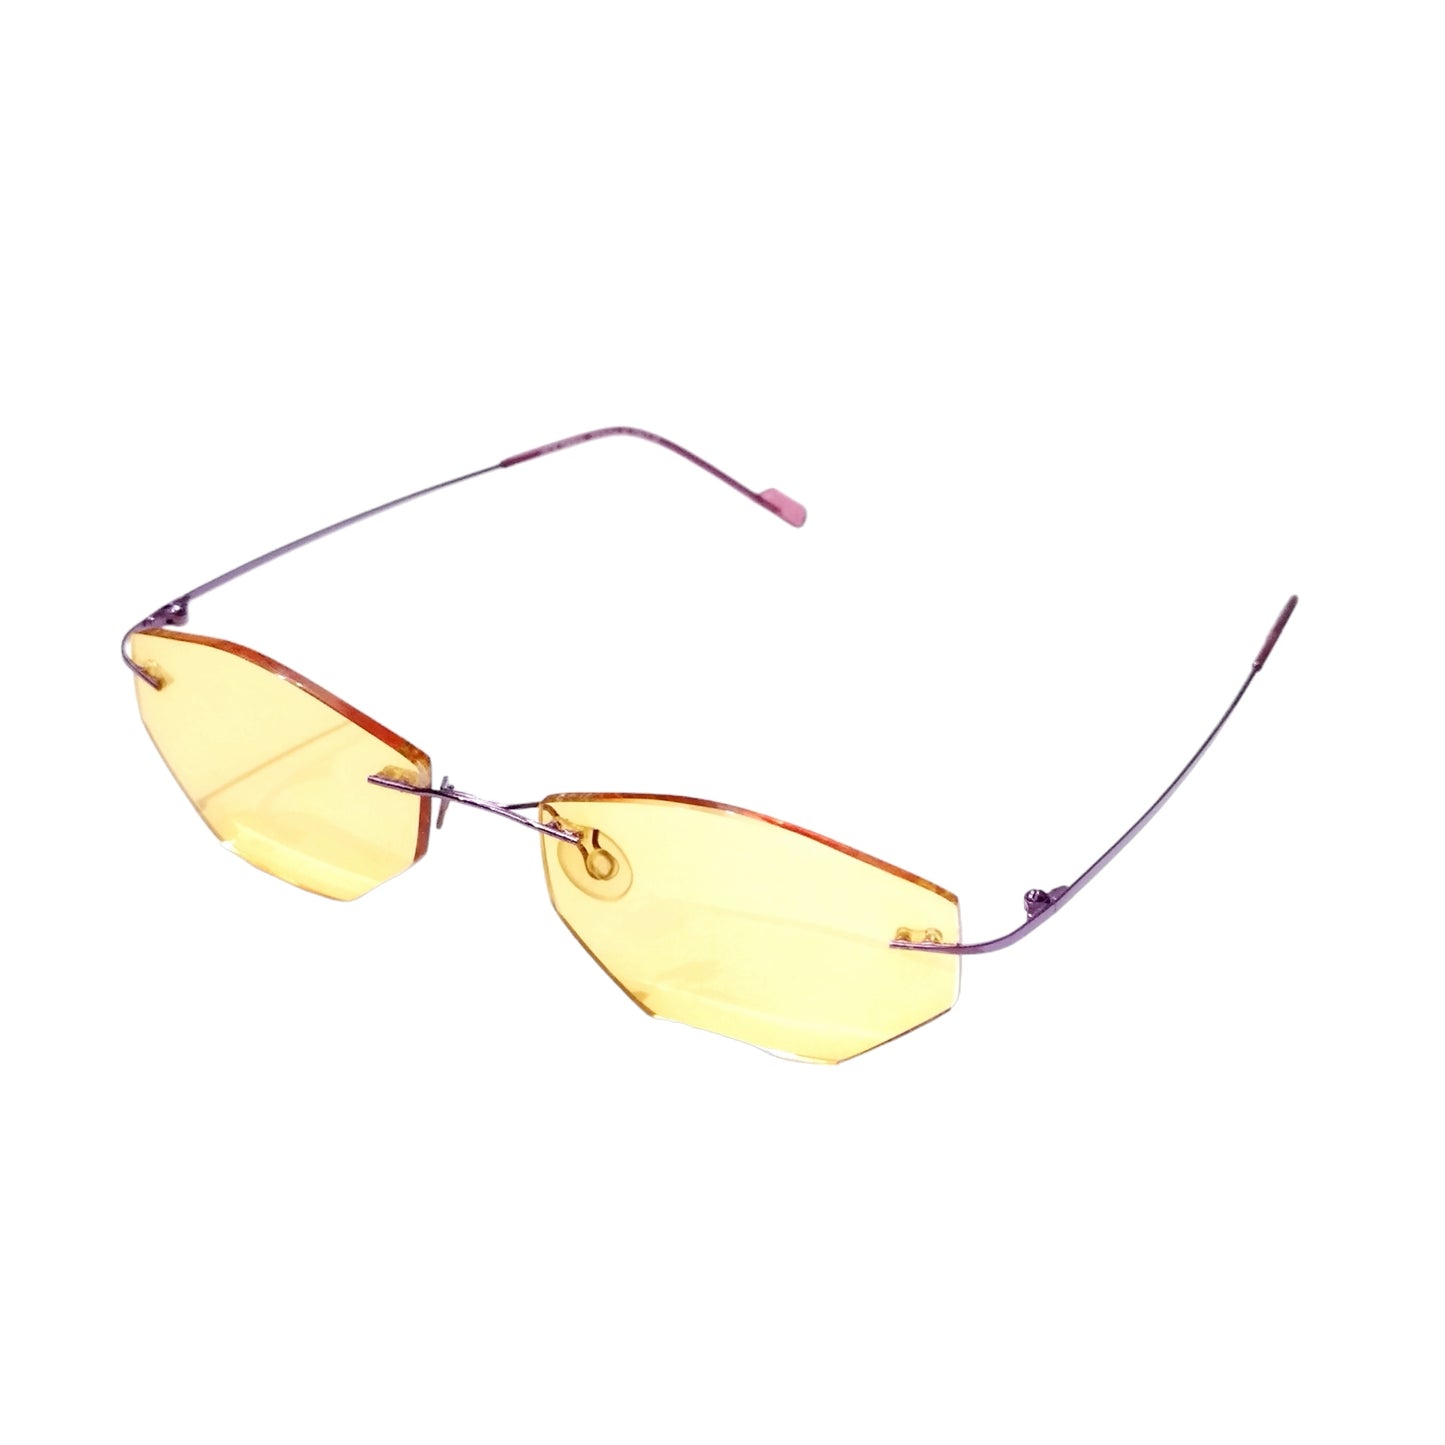 Radiance Range - Boost Your Style with Rimless Elegance